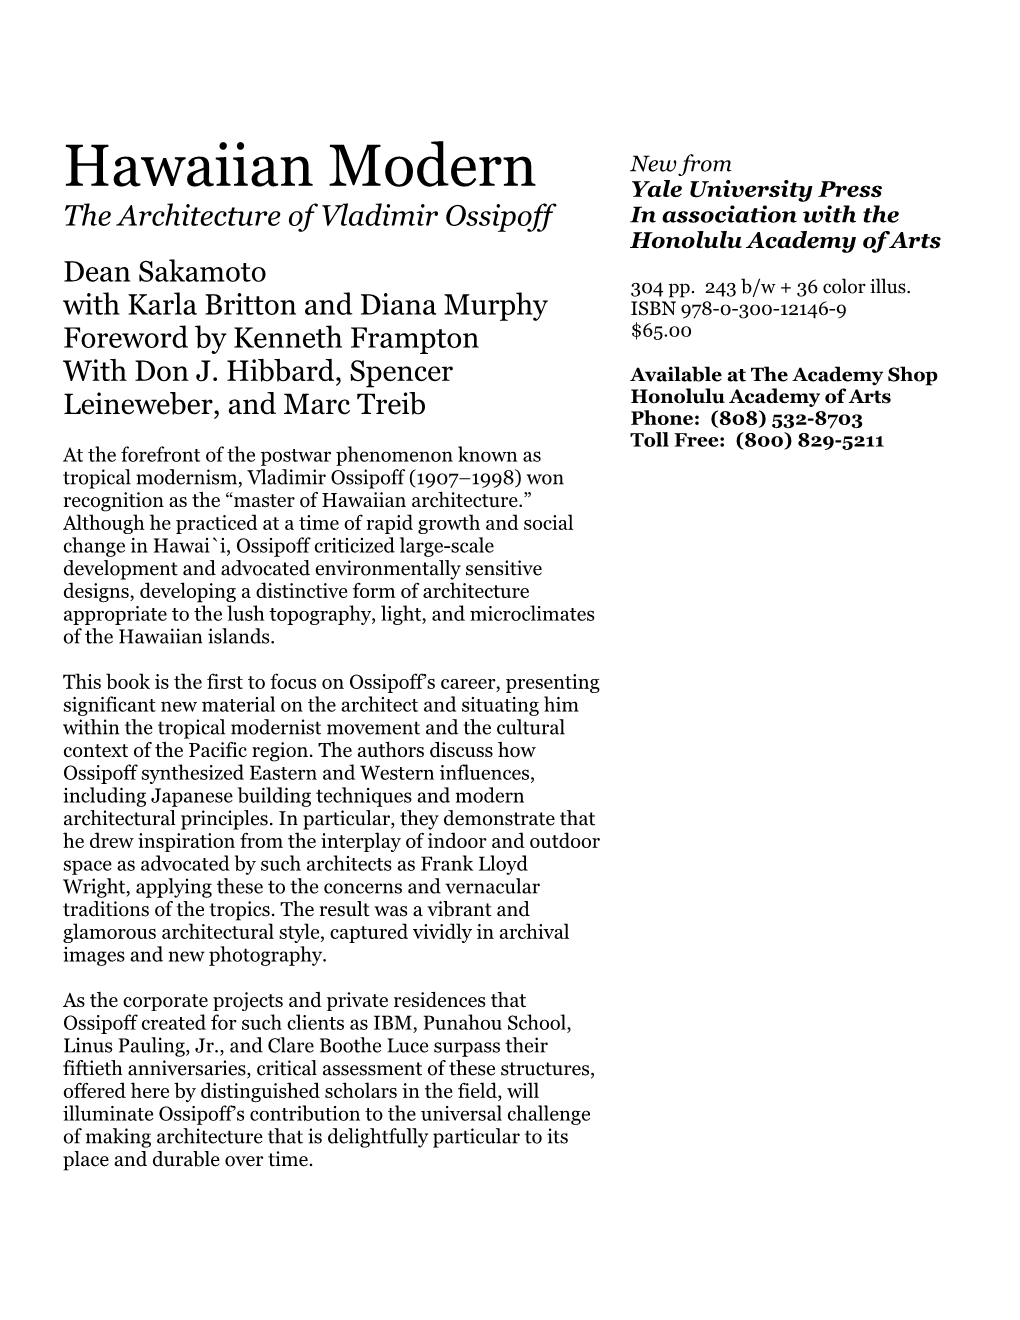 Hawaiian Modern Yale University Press the Architecture of Vladimir Ossipoff in Association with the Honolulu Academy of Arts